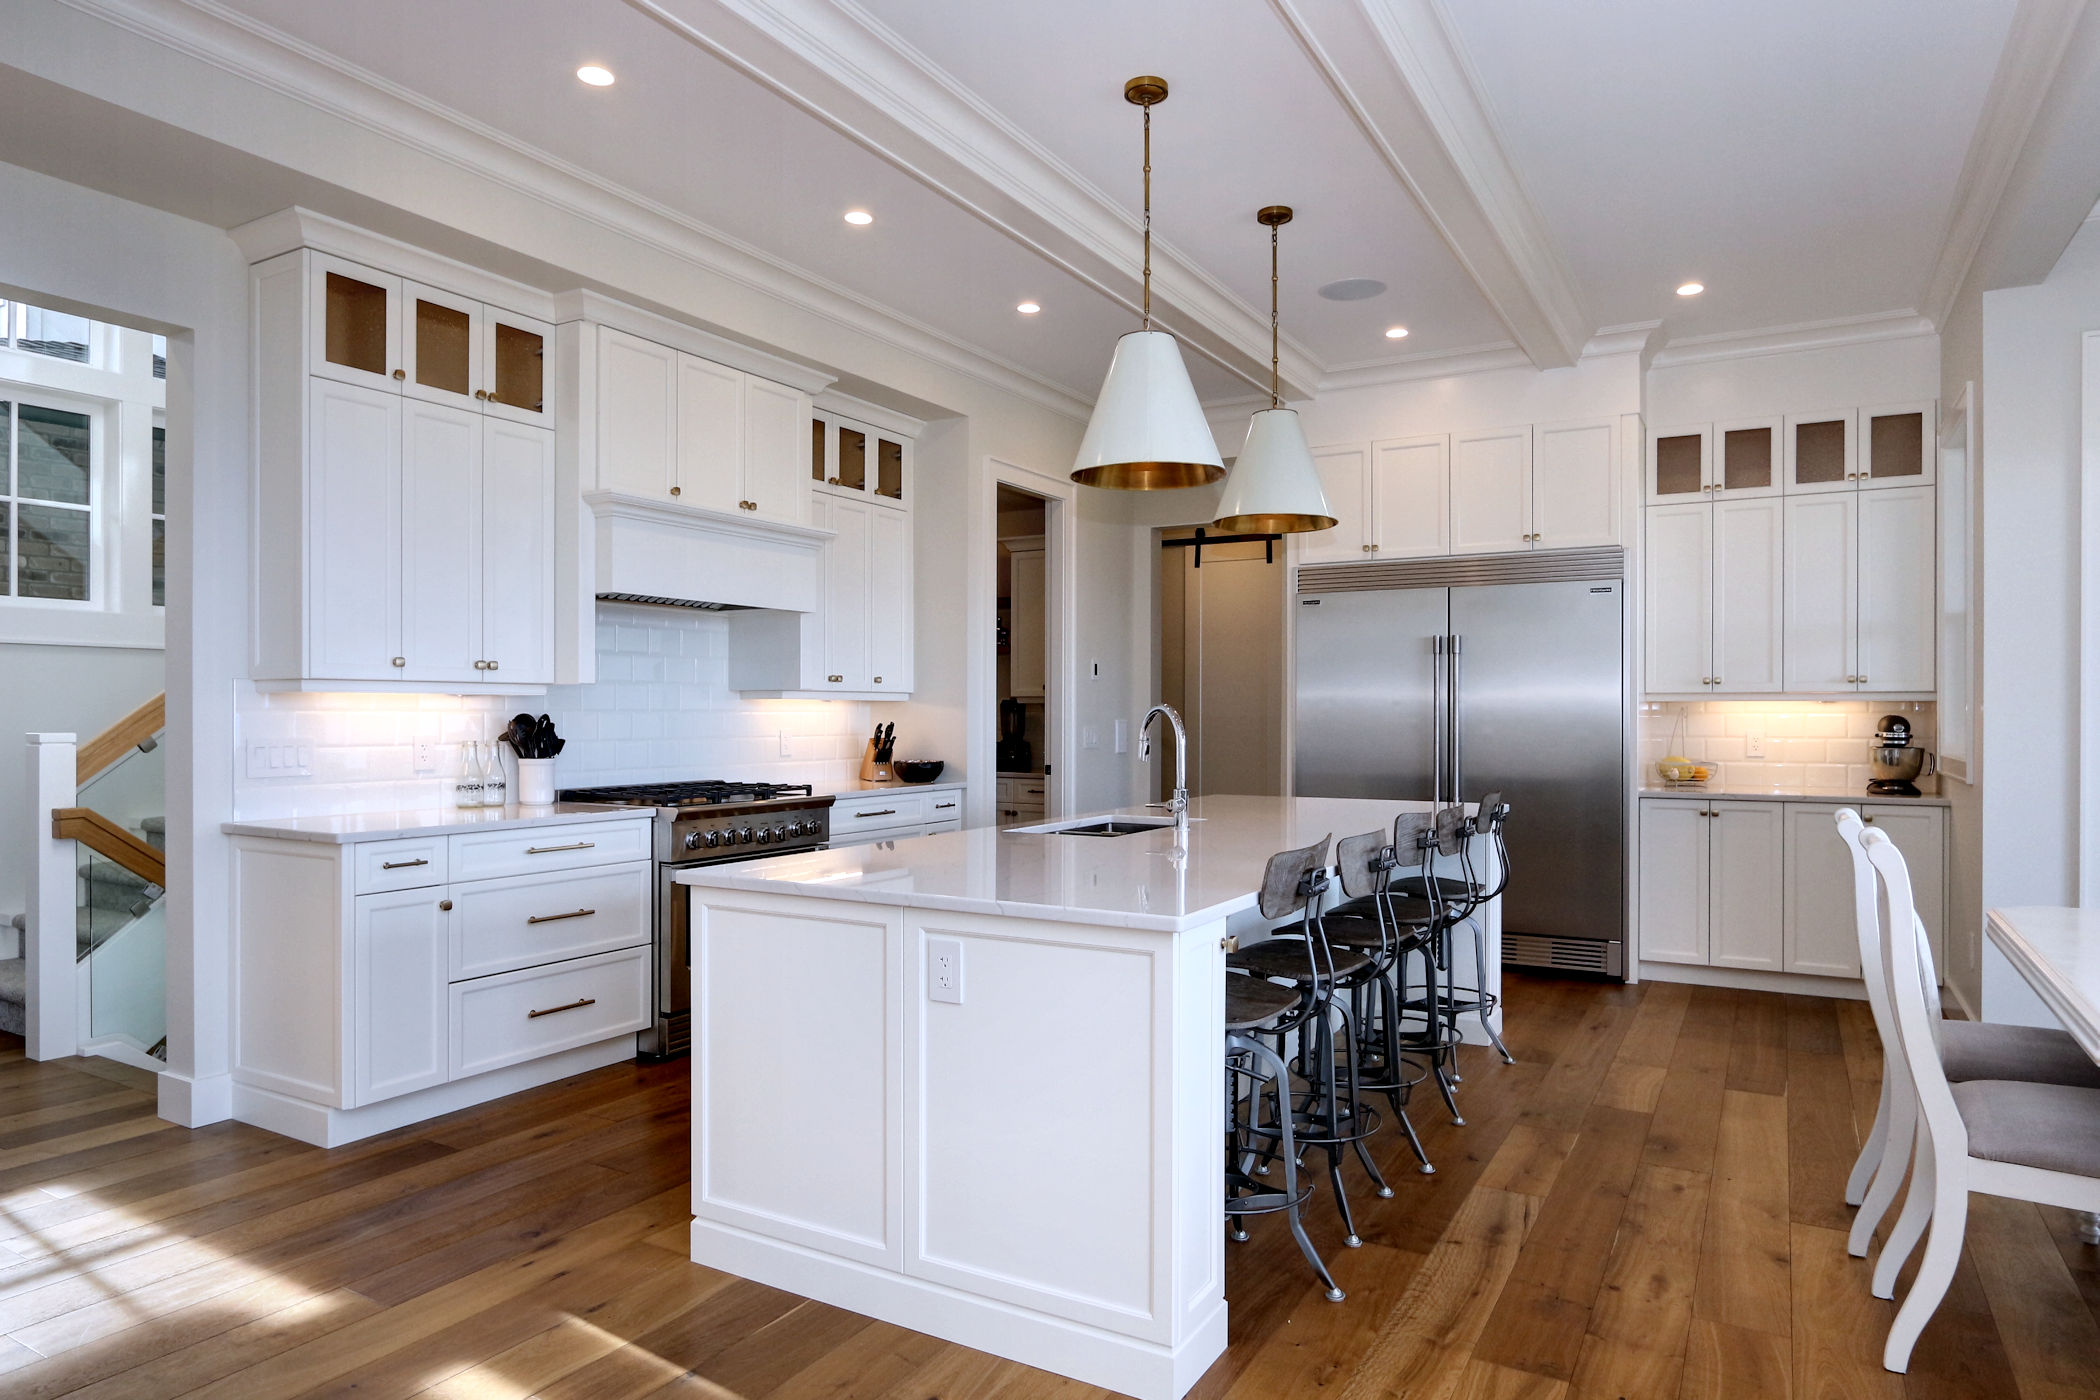 Open concept kitchen with large white island at 470 Rockview Lane, a custom home build and interior design by Stark Homes